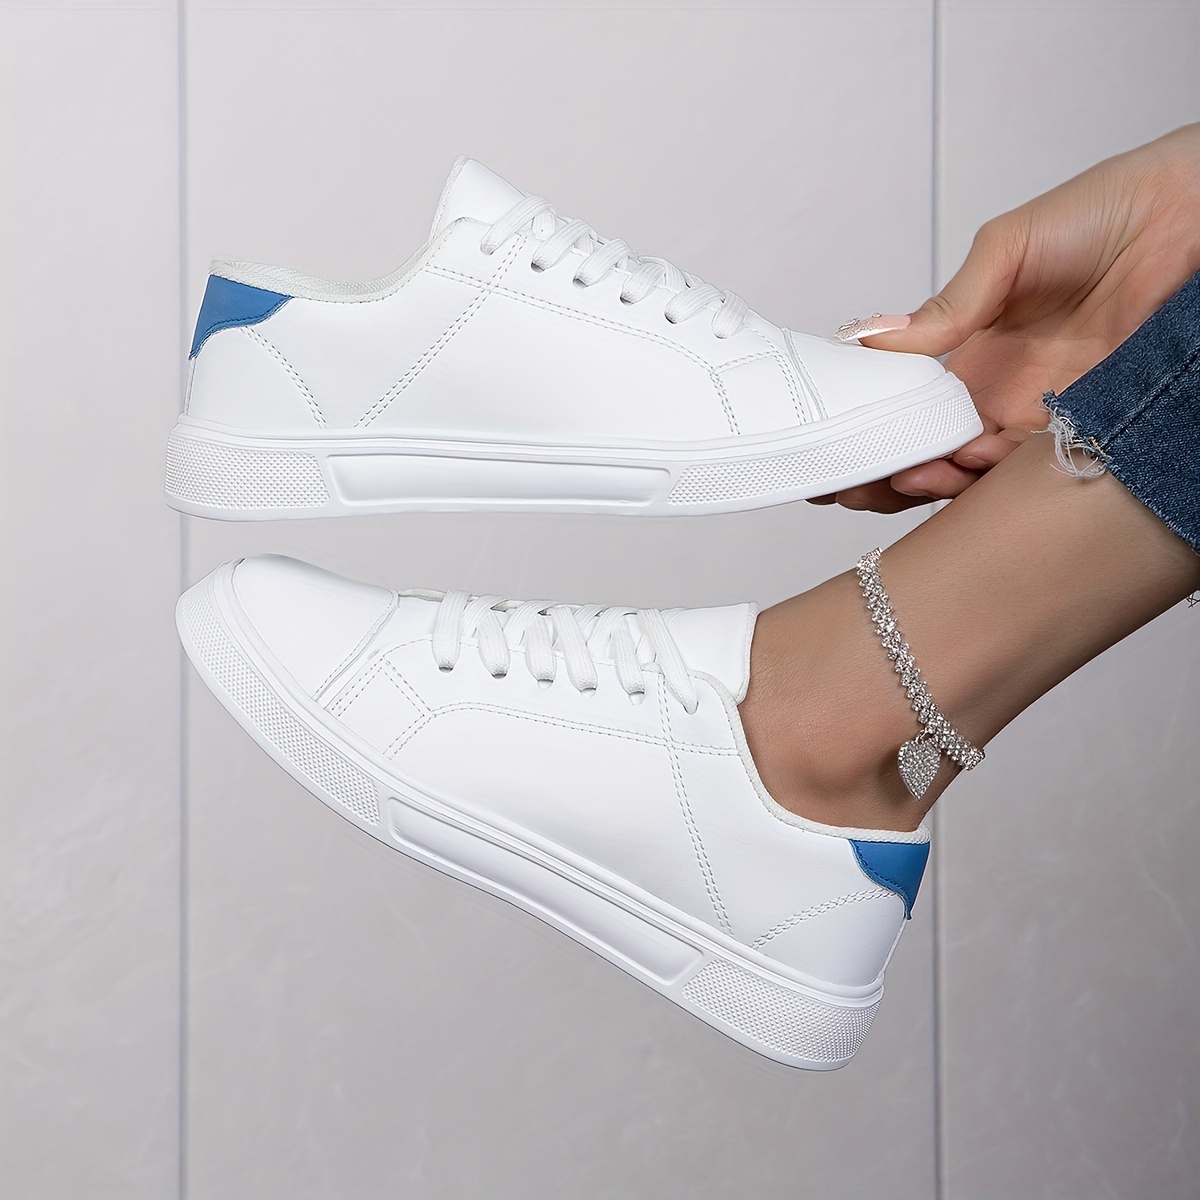 

Women's Fashion Solid Color Sneakers, Low-top Casual White Shoes With Blue Accent, Comfortable Flat Lace-up Trainers For Daily Wear